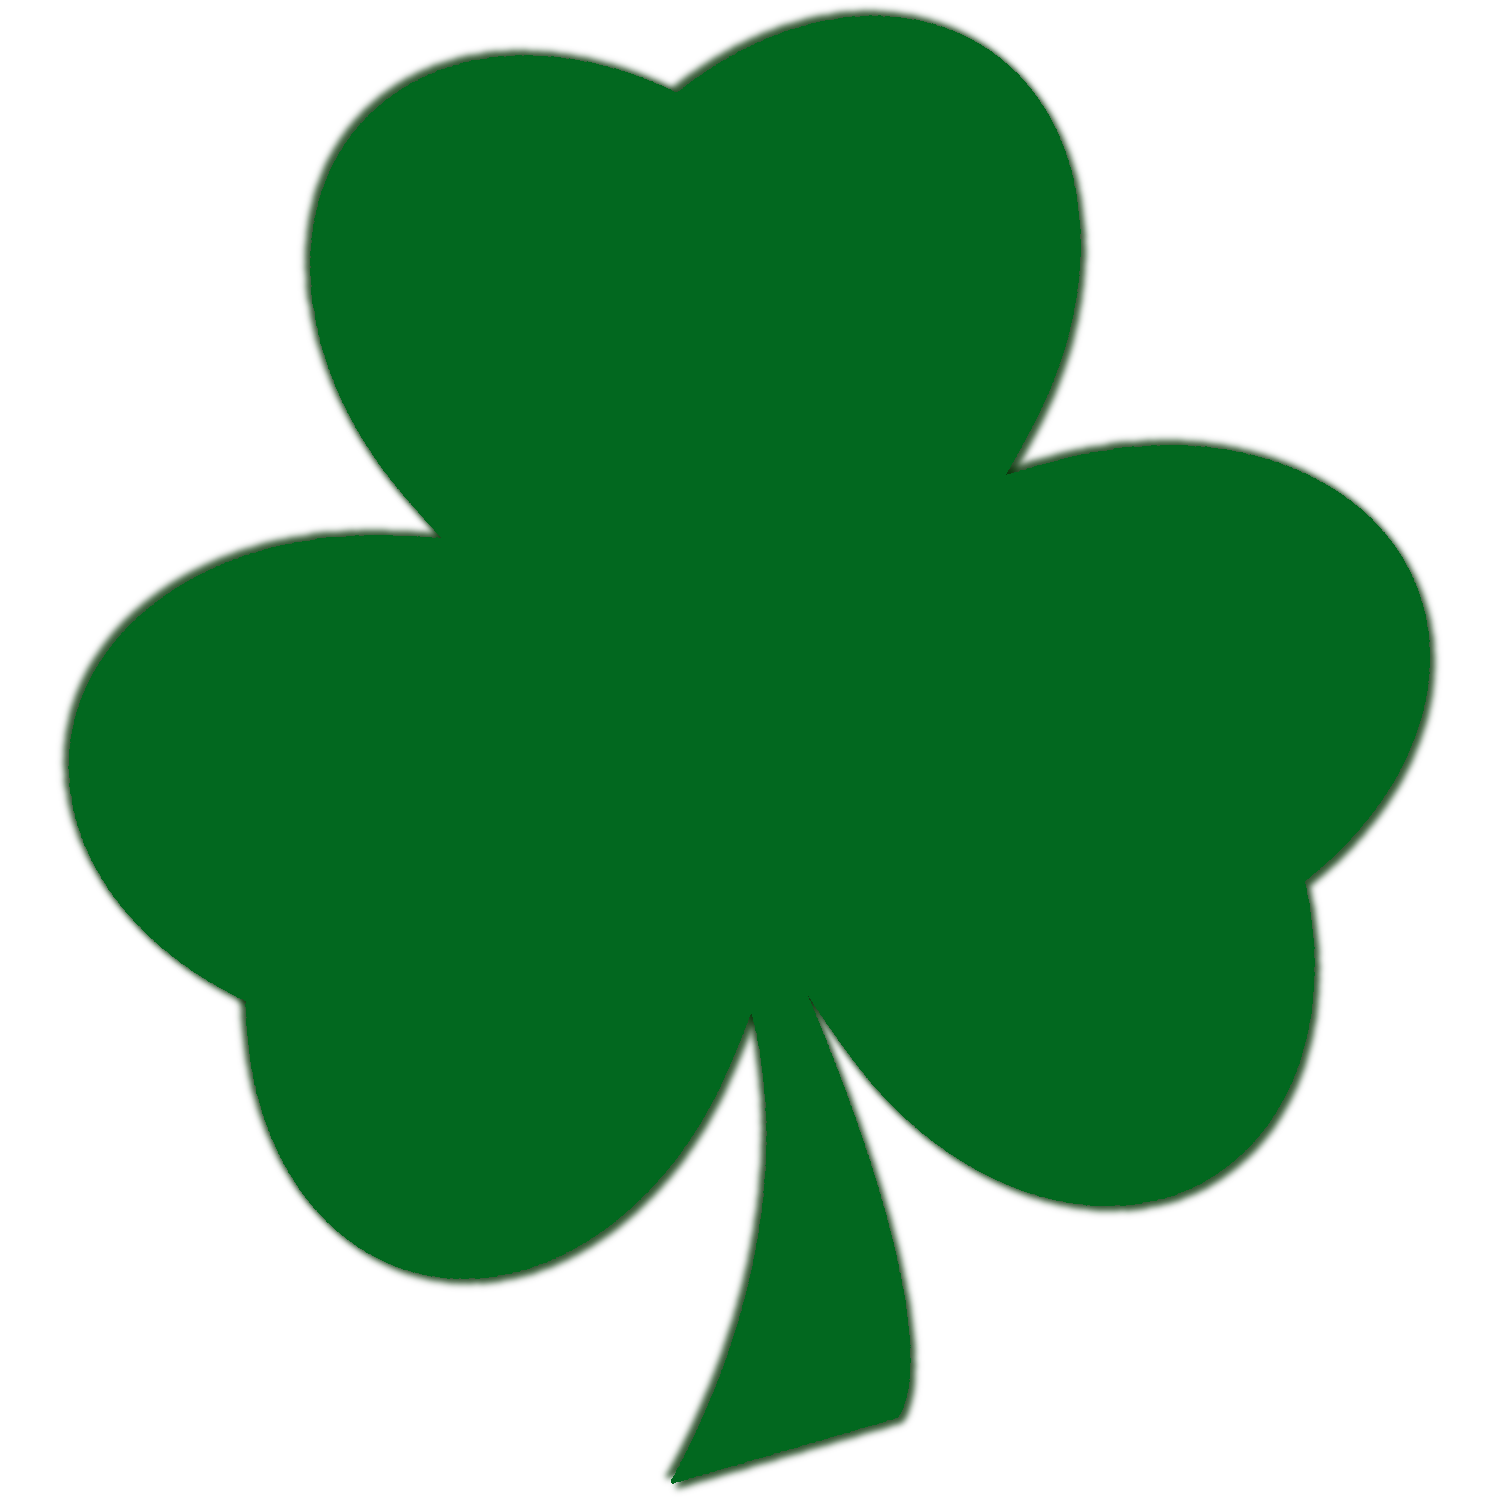 Share St Patrick S Day Recipes Share Links To St